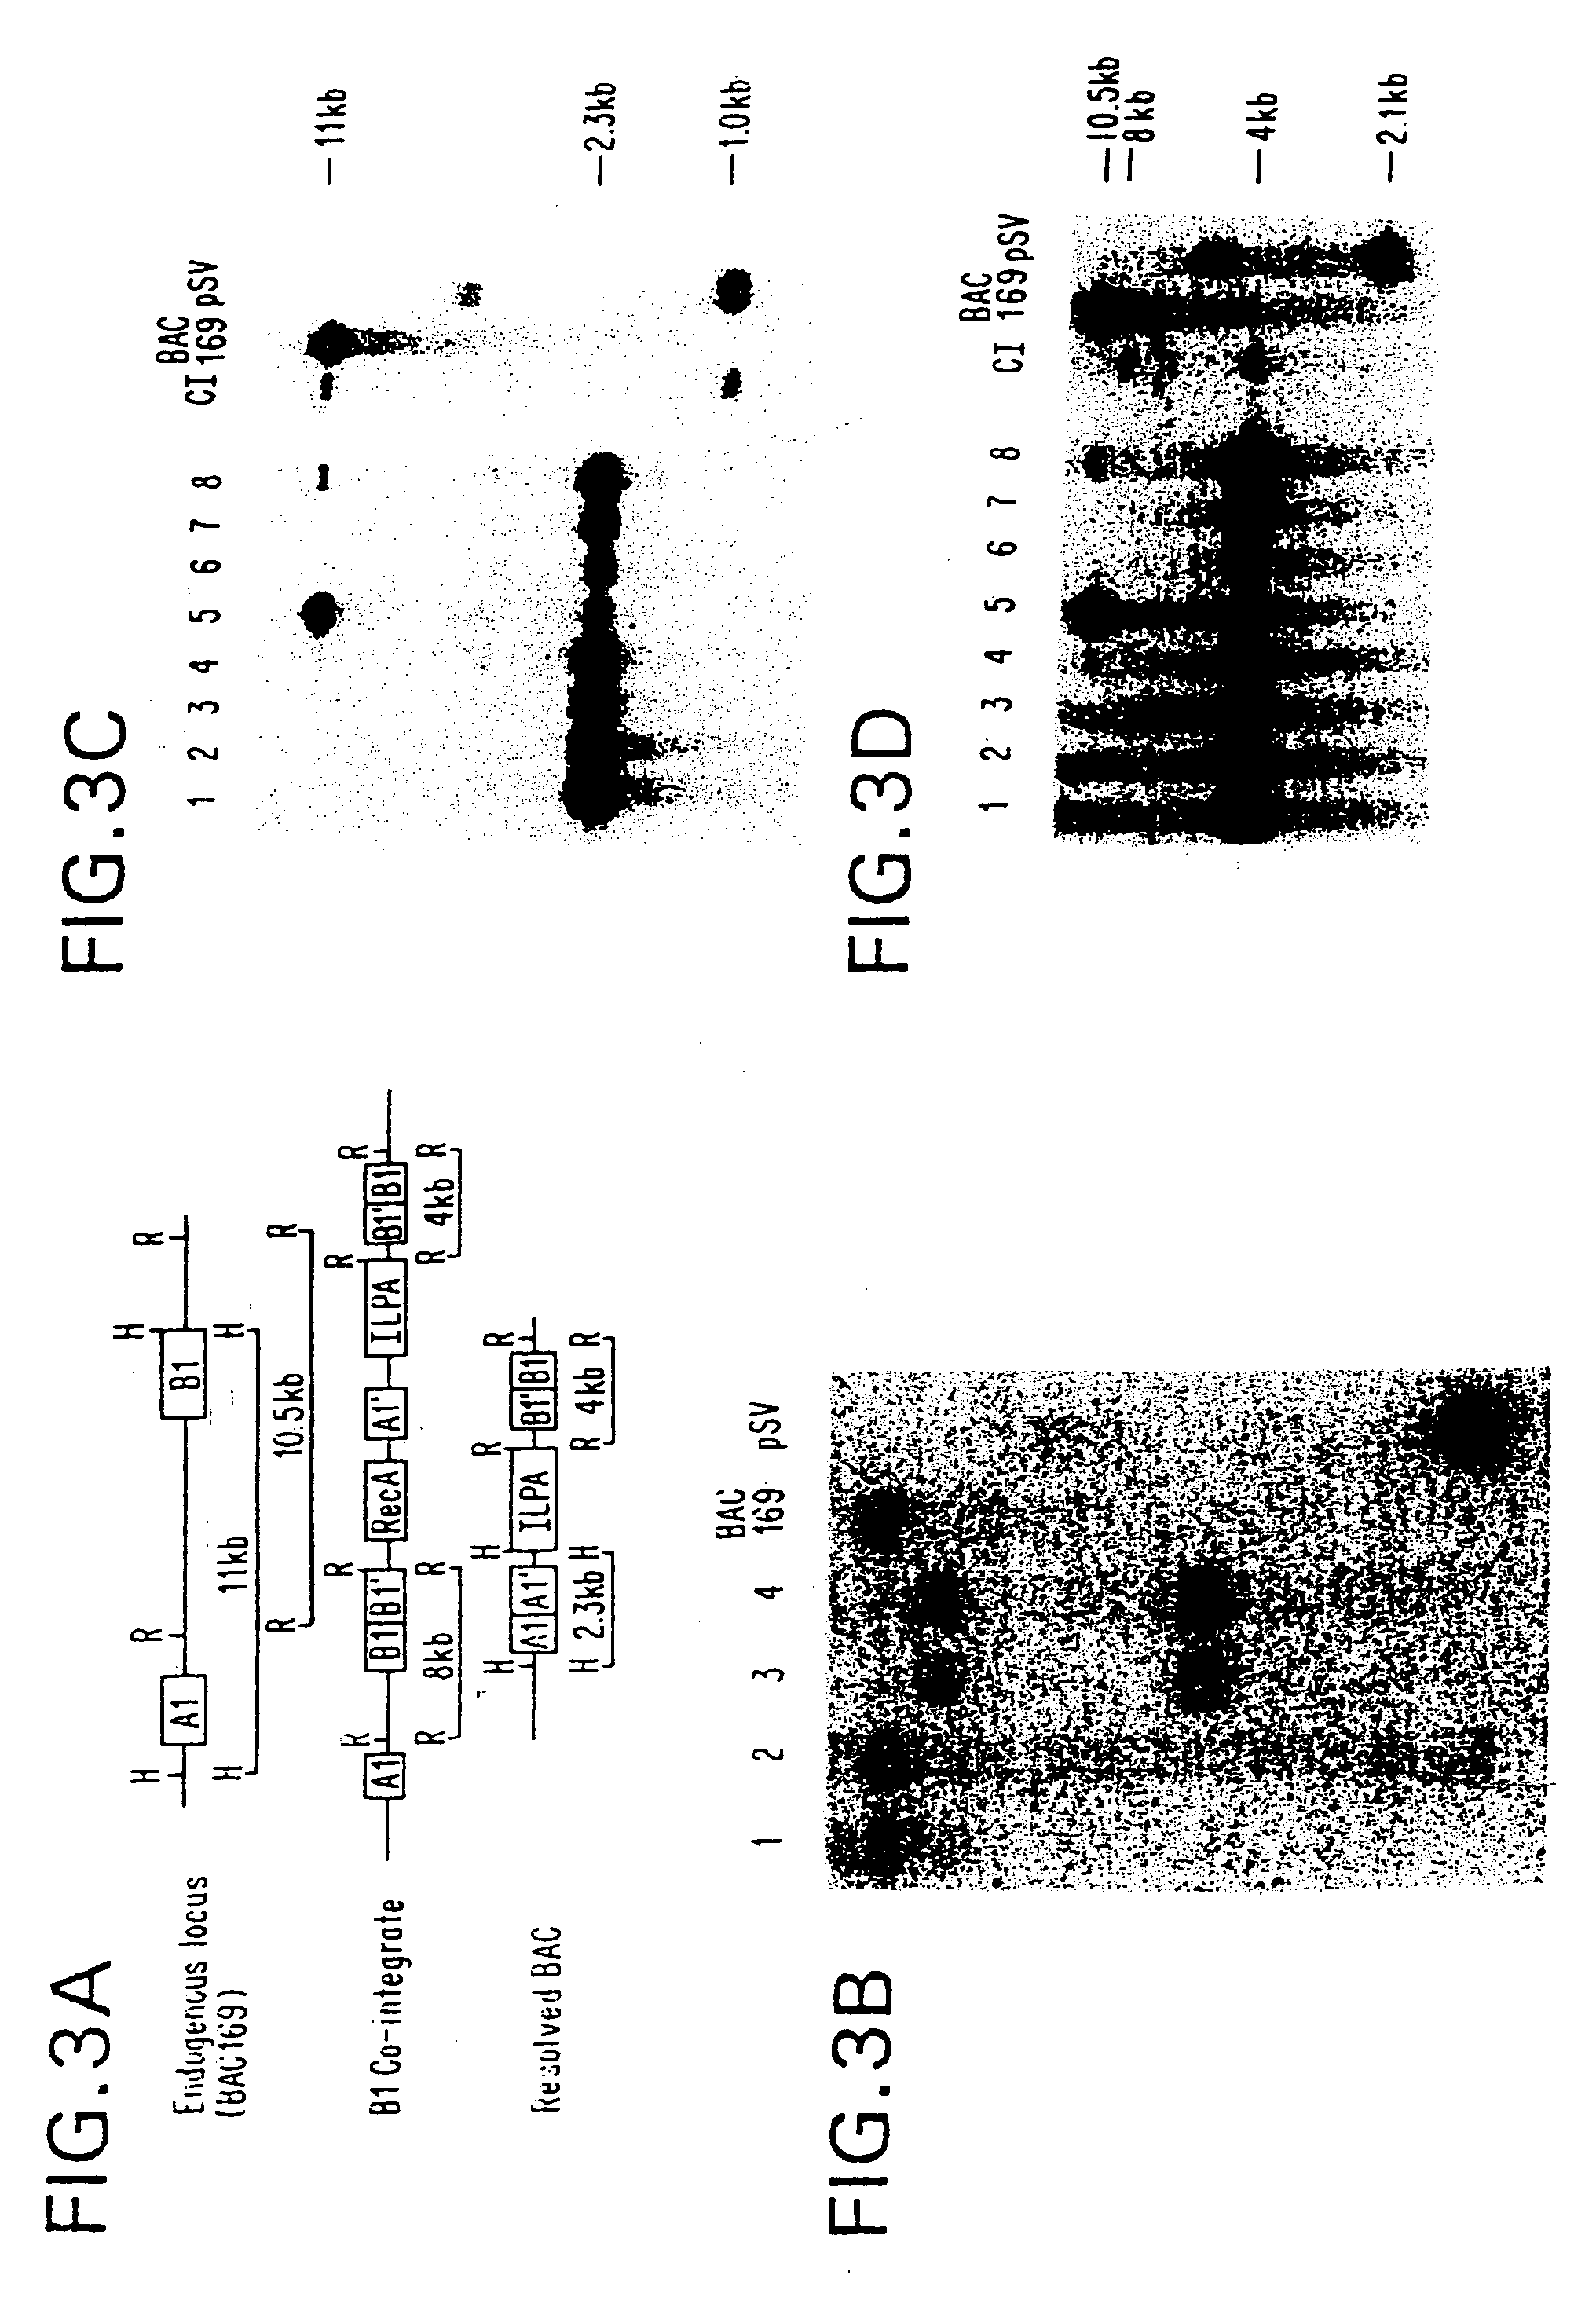 Methods of preforming homologous recombination based modification of nucleic acids in recombination deficient cells and use of the modified nucleic acid products thereof